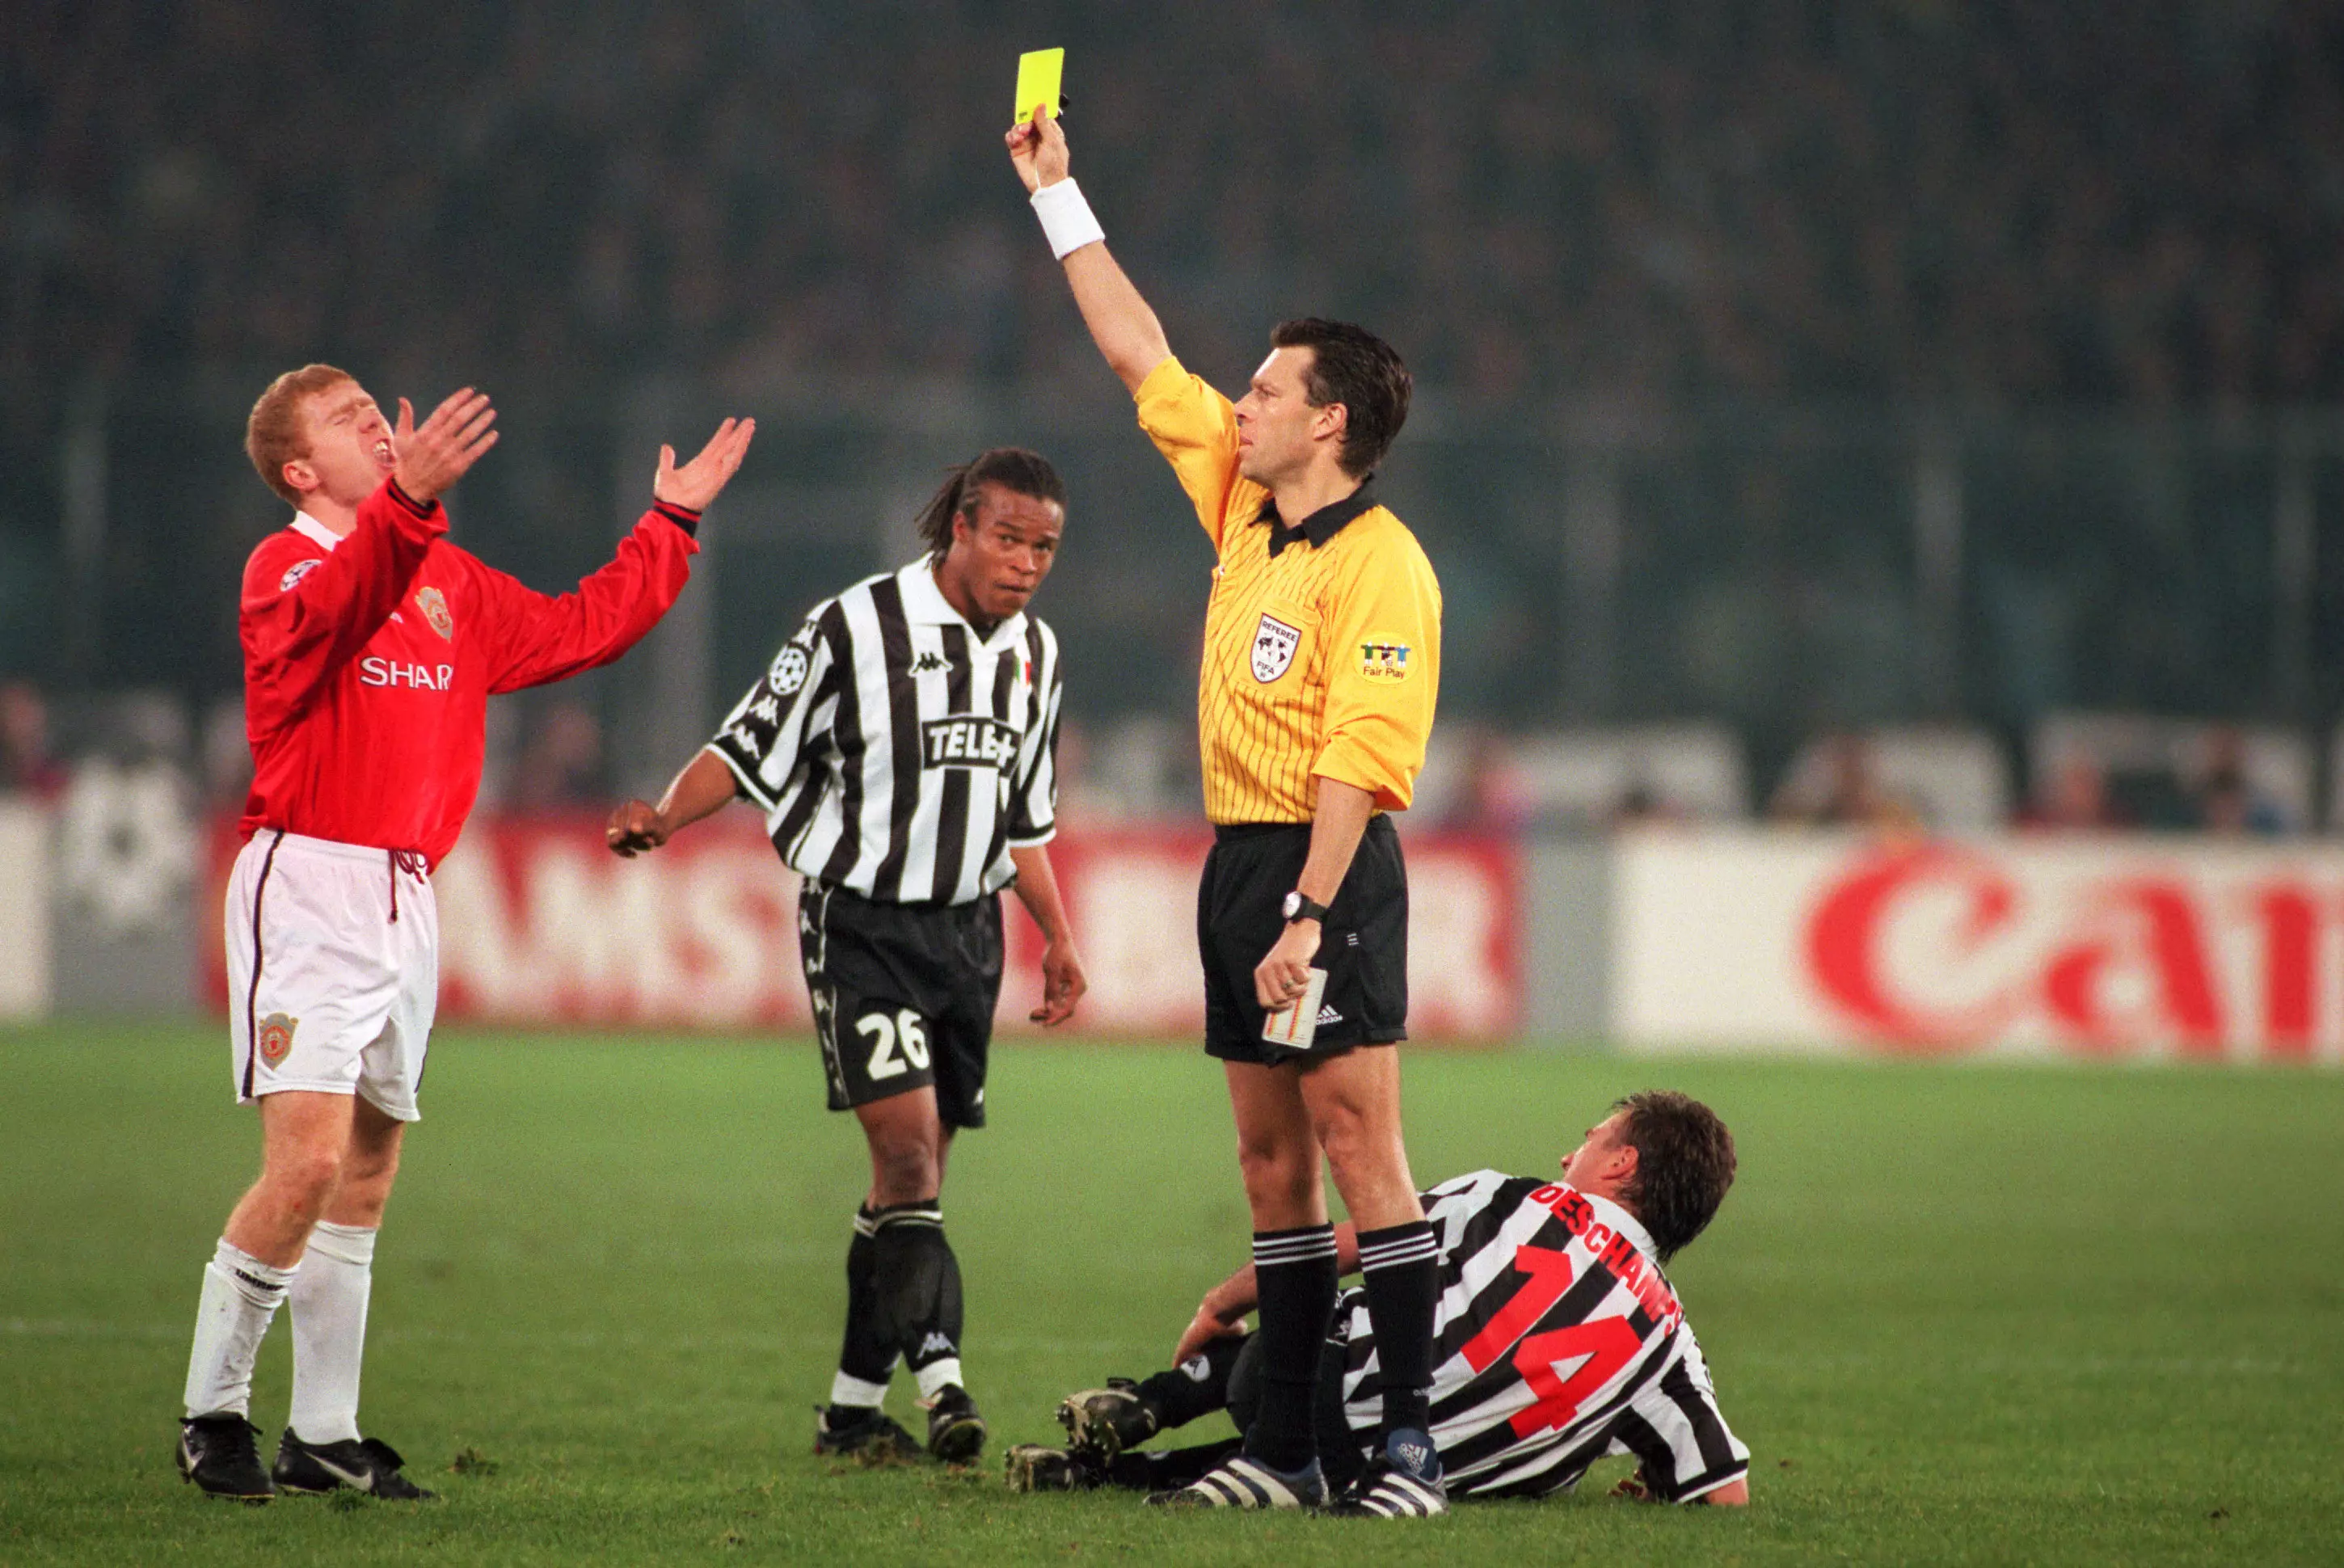 Scholes' yellow card against Juventus kept him out of the 1999 Champions League final. Image: PA Images